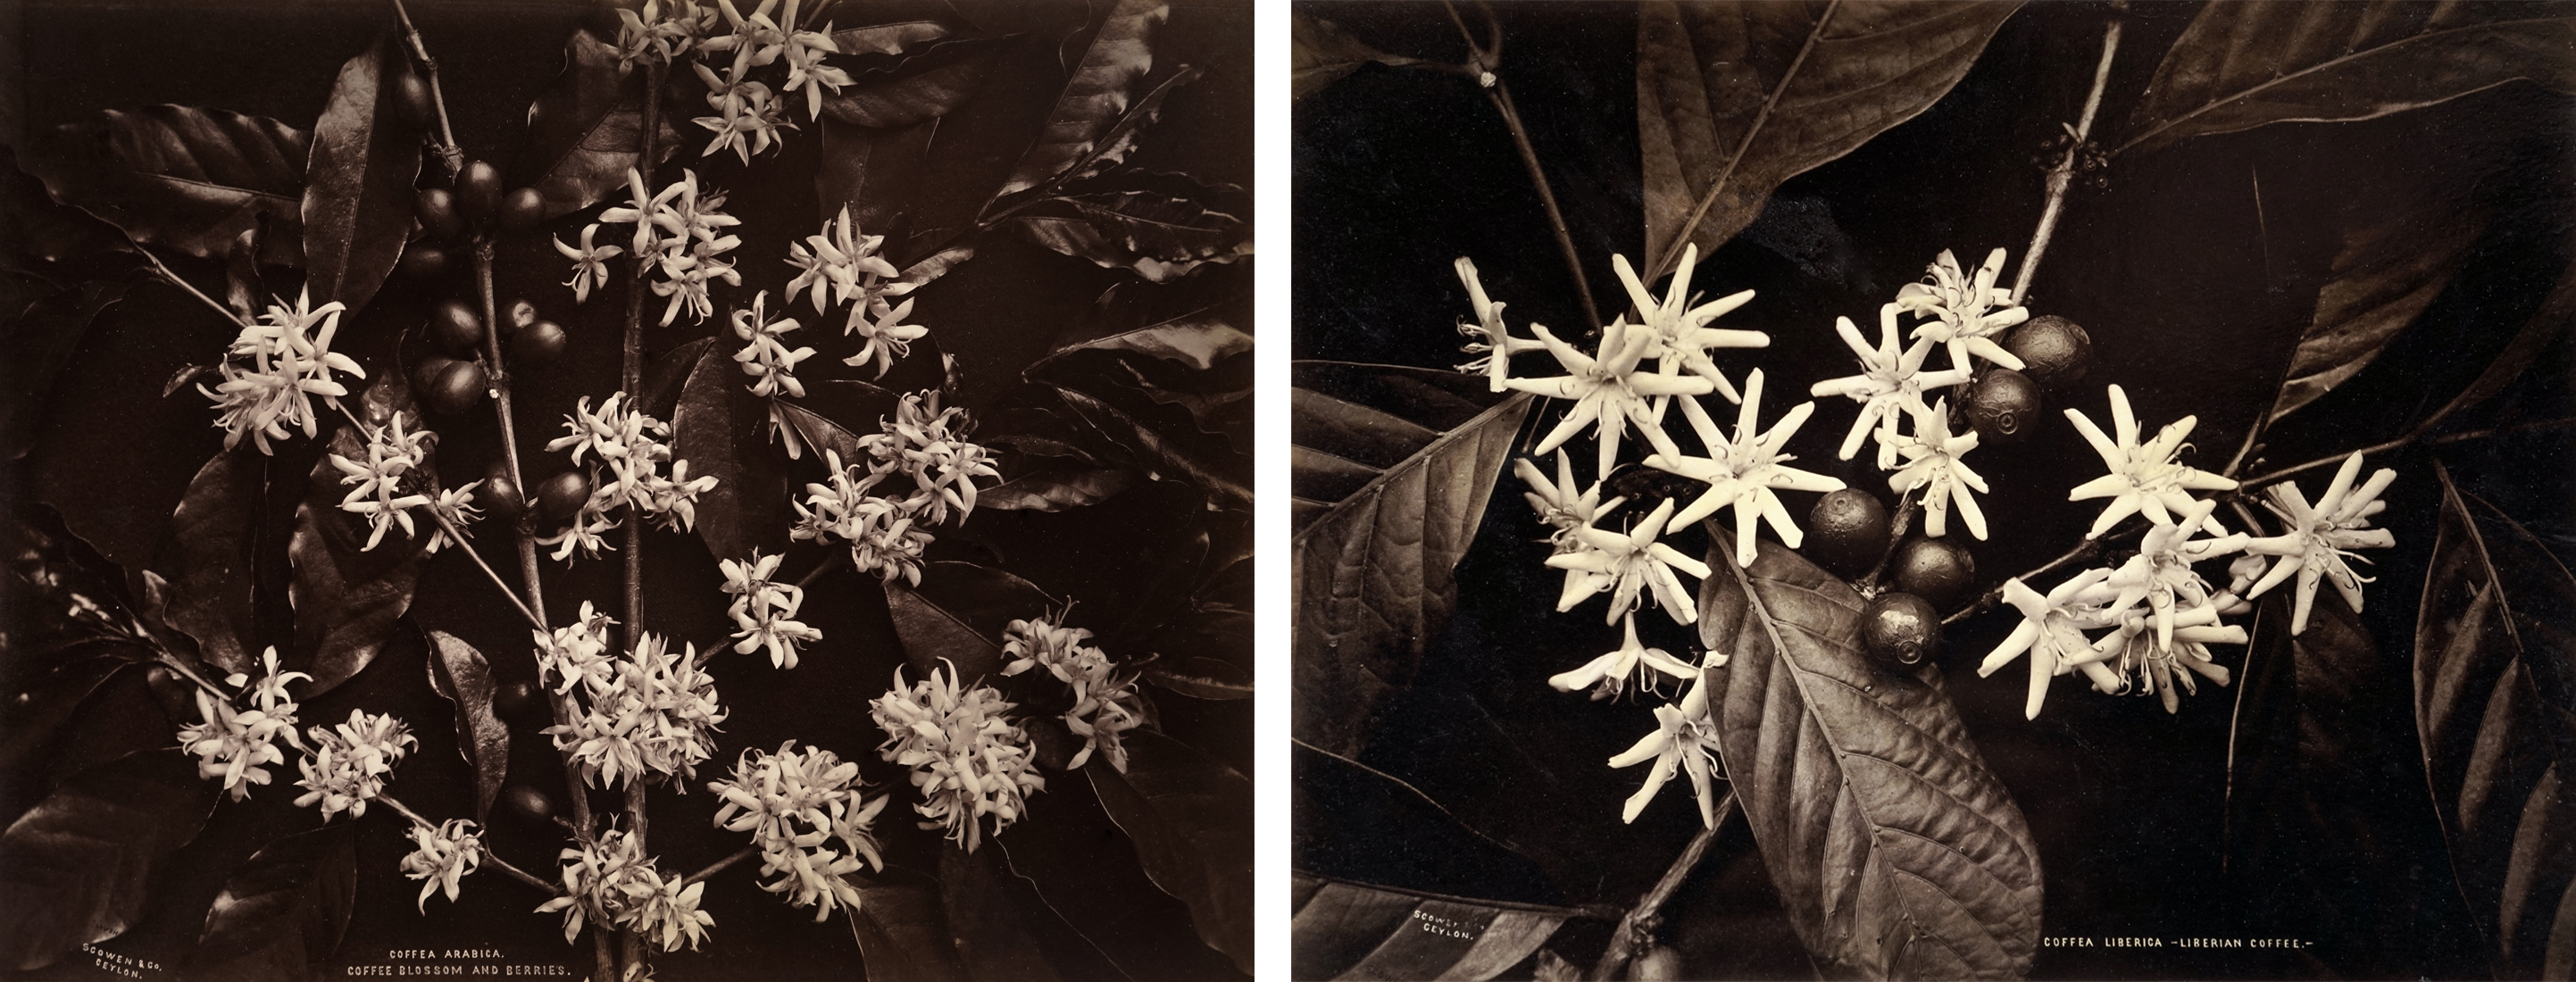 Left: Charles T. Scowen & Co., Coffea Arabica. Coffee Blossom and Berries., Sri Lanka, probably Central Province, c. 1880, Lent by Peter Fetterman Gallery, photo courtesy of the lender; Right: Charles T. Scowen & Co., Coffea Liberica–Liberian Coffee, Sri Lanka, probably Central Province, c. 1875–80, Lent by Peter Fetterman Gallery, photo courtesy of the lender